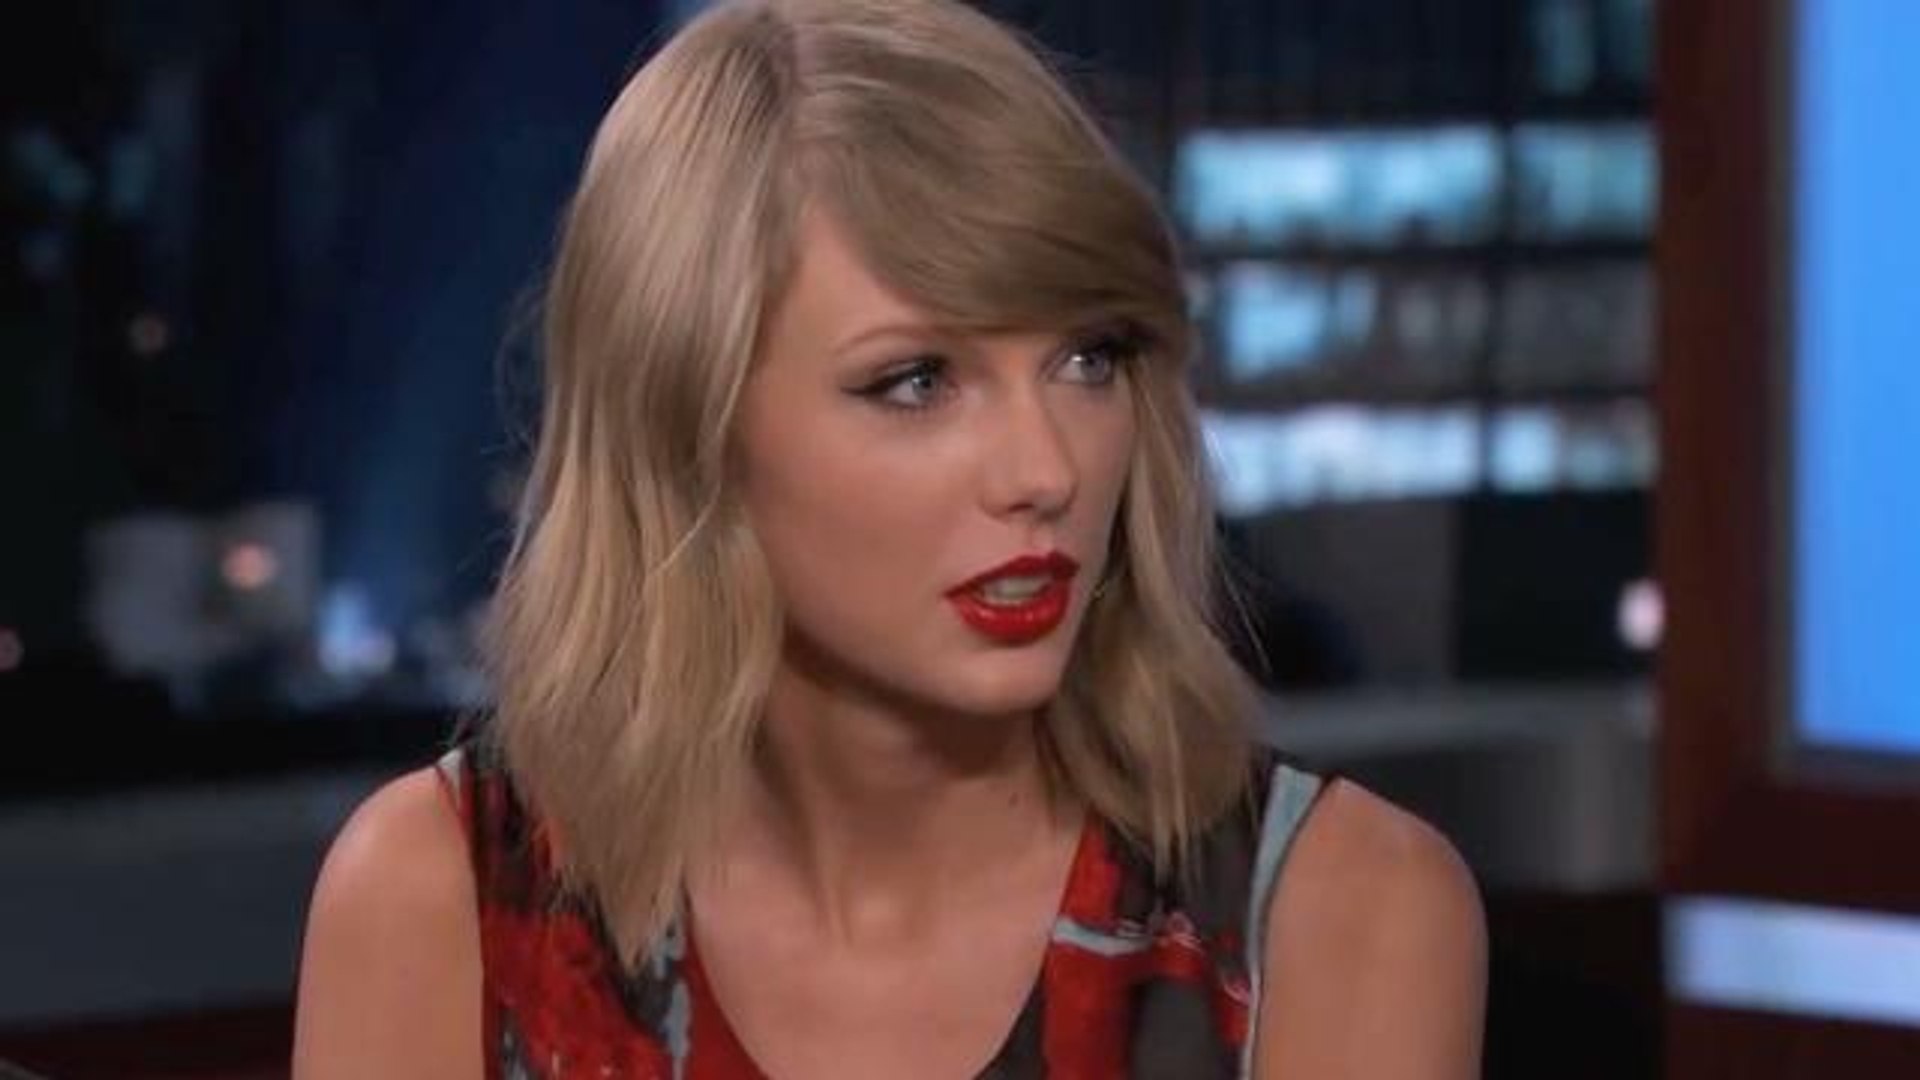 Taylor Swift Talks 1989 & Reveals her Perfect Relationship on ‘Jimmy Kimmel Live’